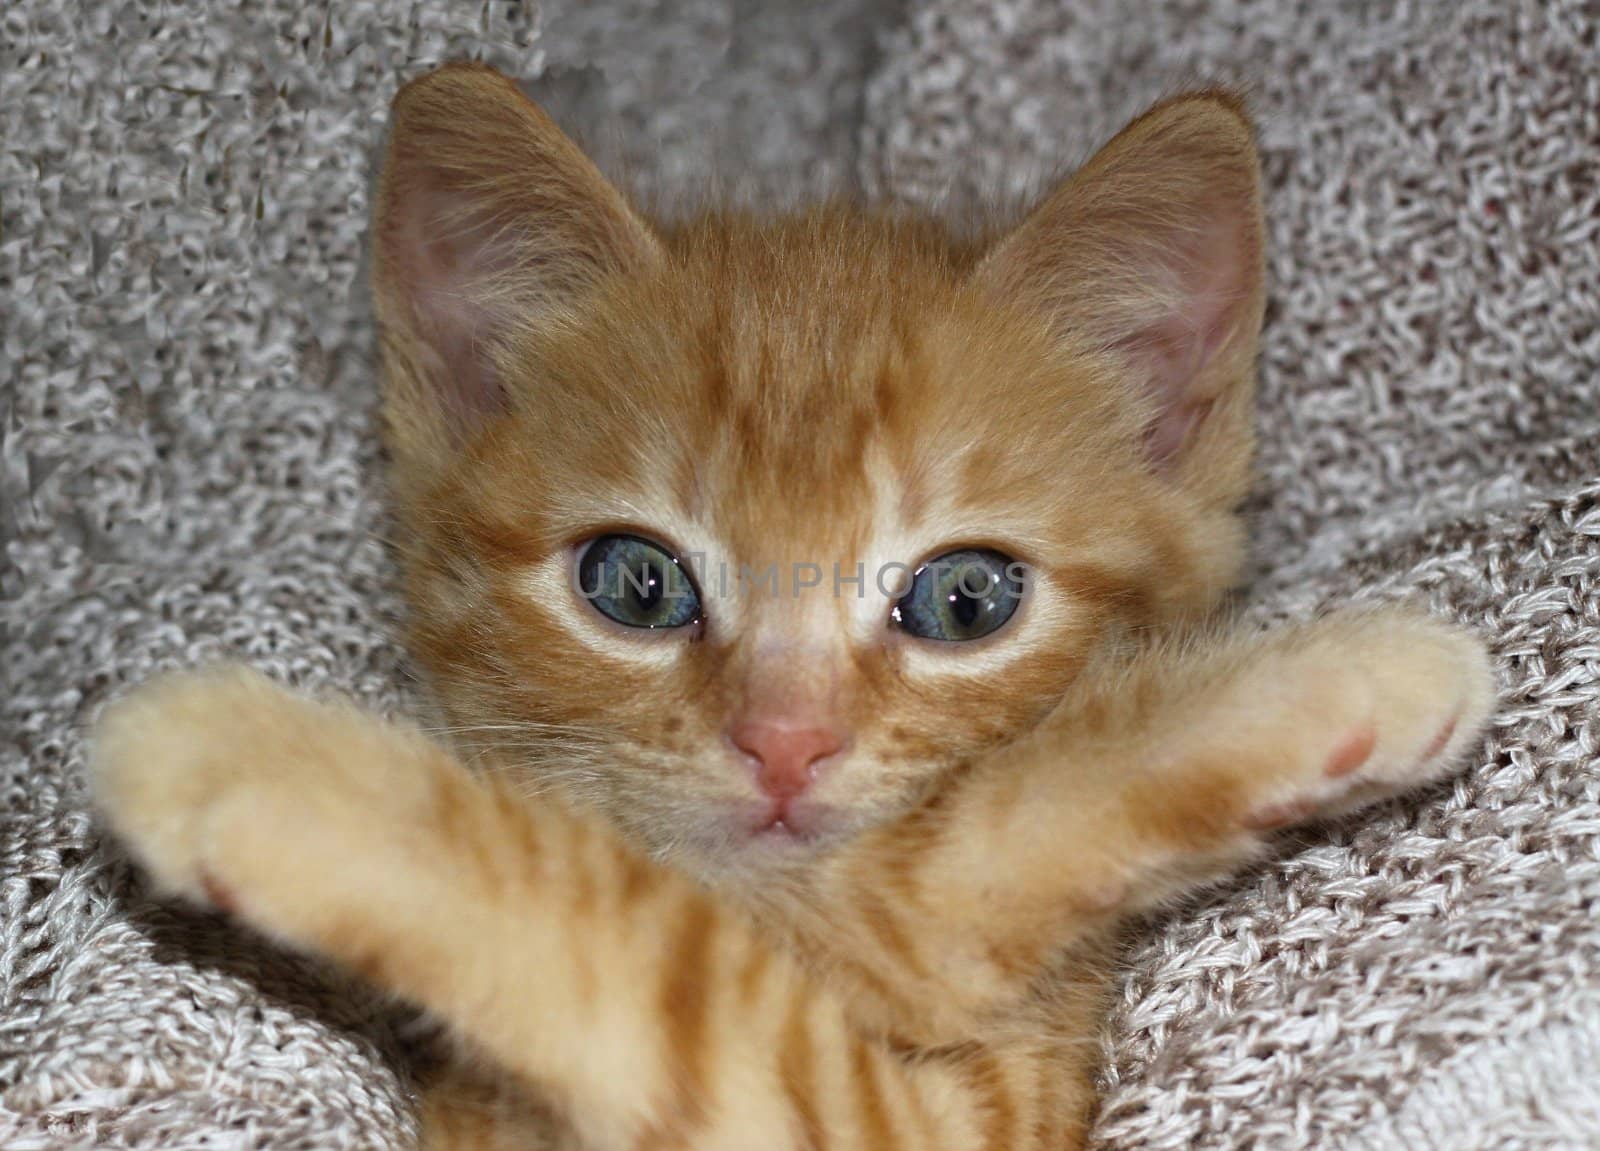 Kitten with great eyes and cross paw